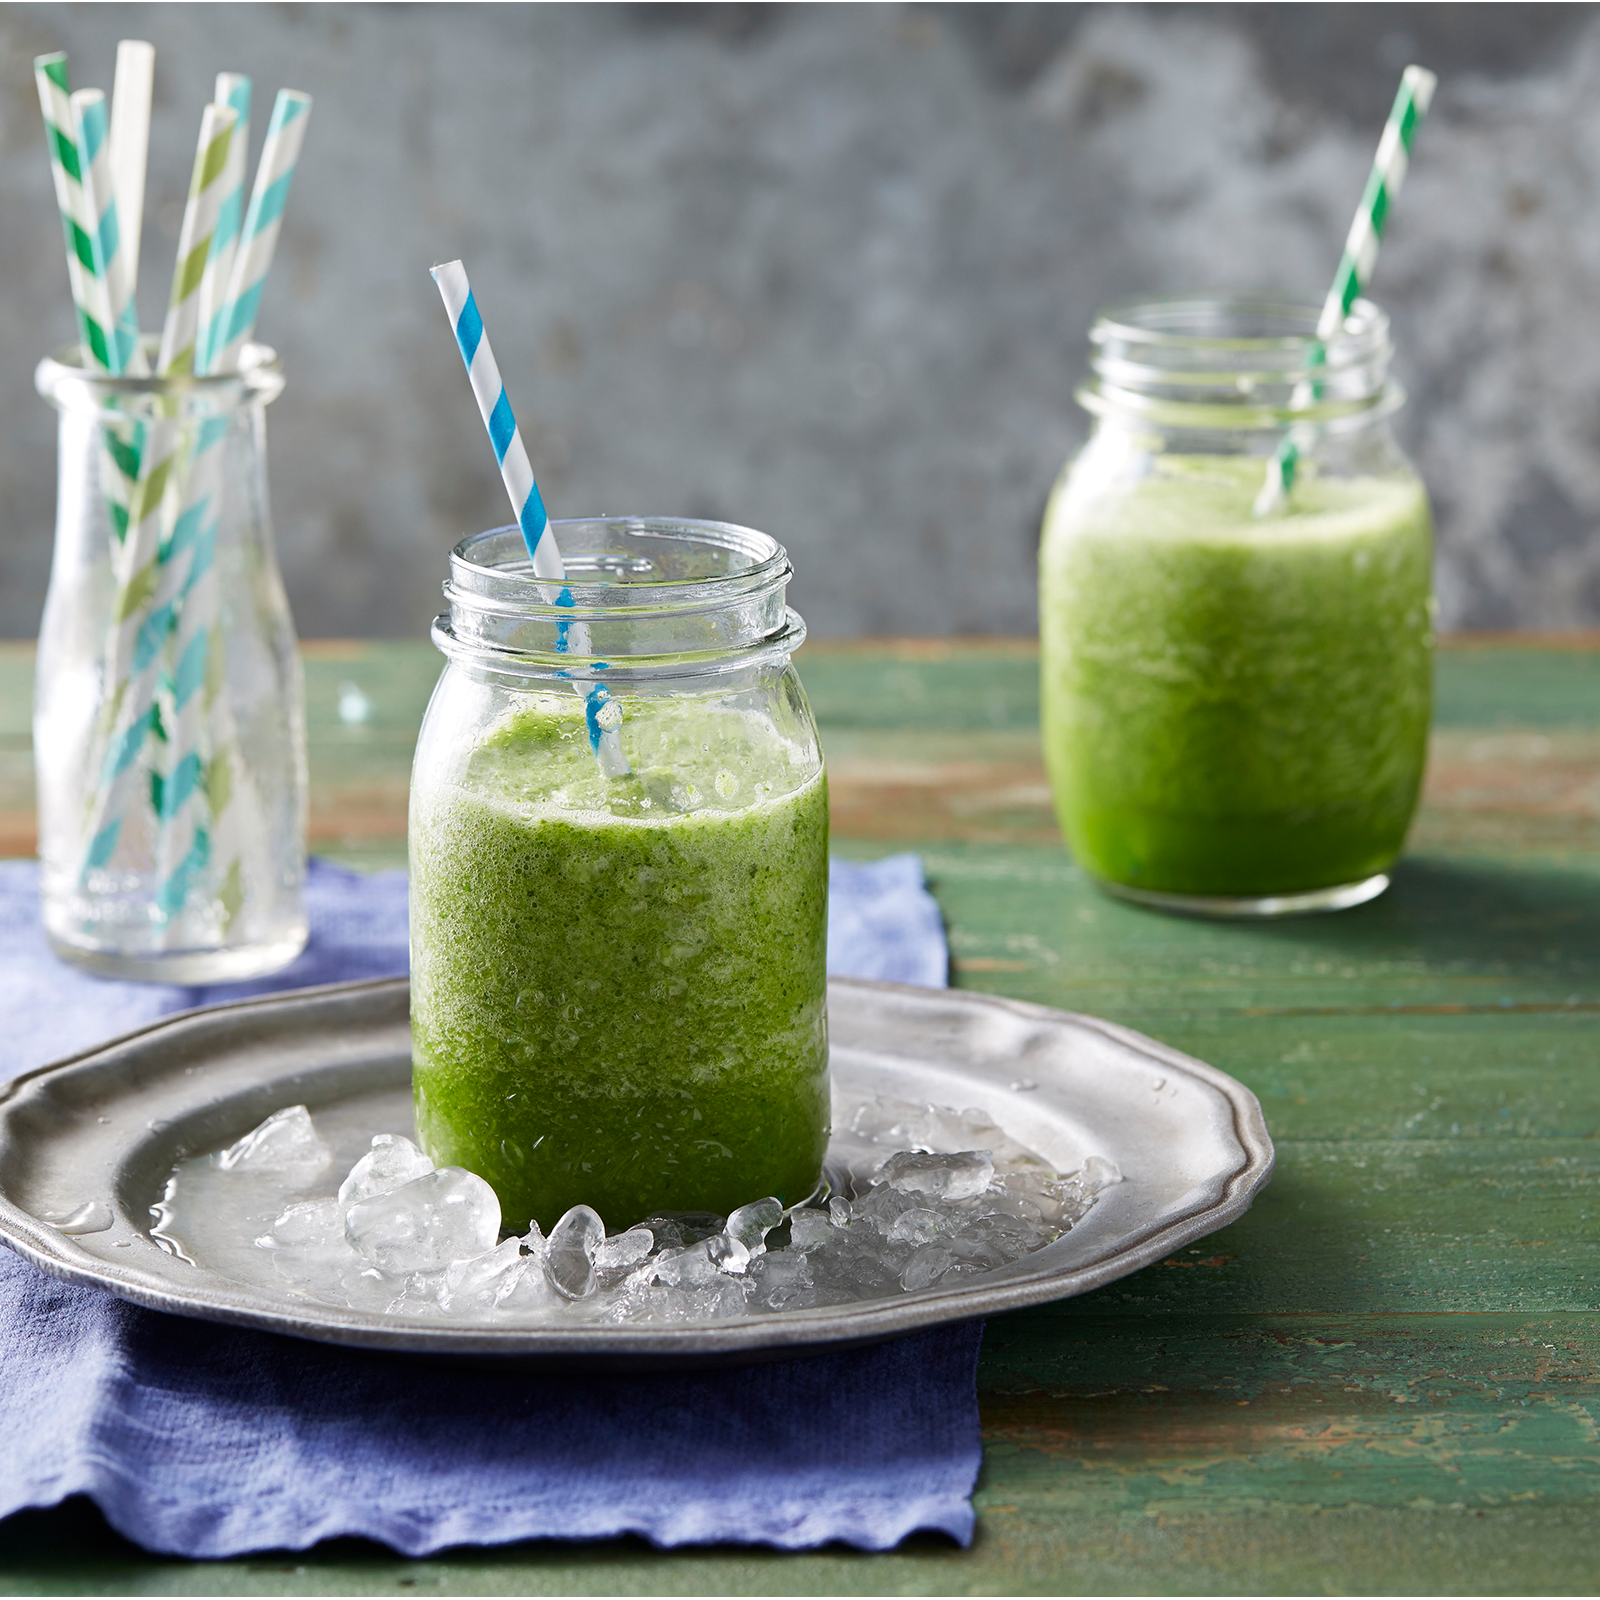 Two glass jars filled with a green smoothie. Both glasses have green and white striped straws. One glass jar site on a silver plate filled with ice.